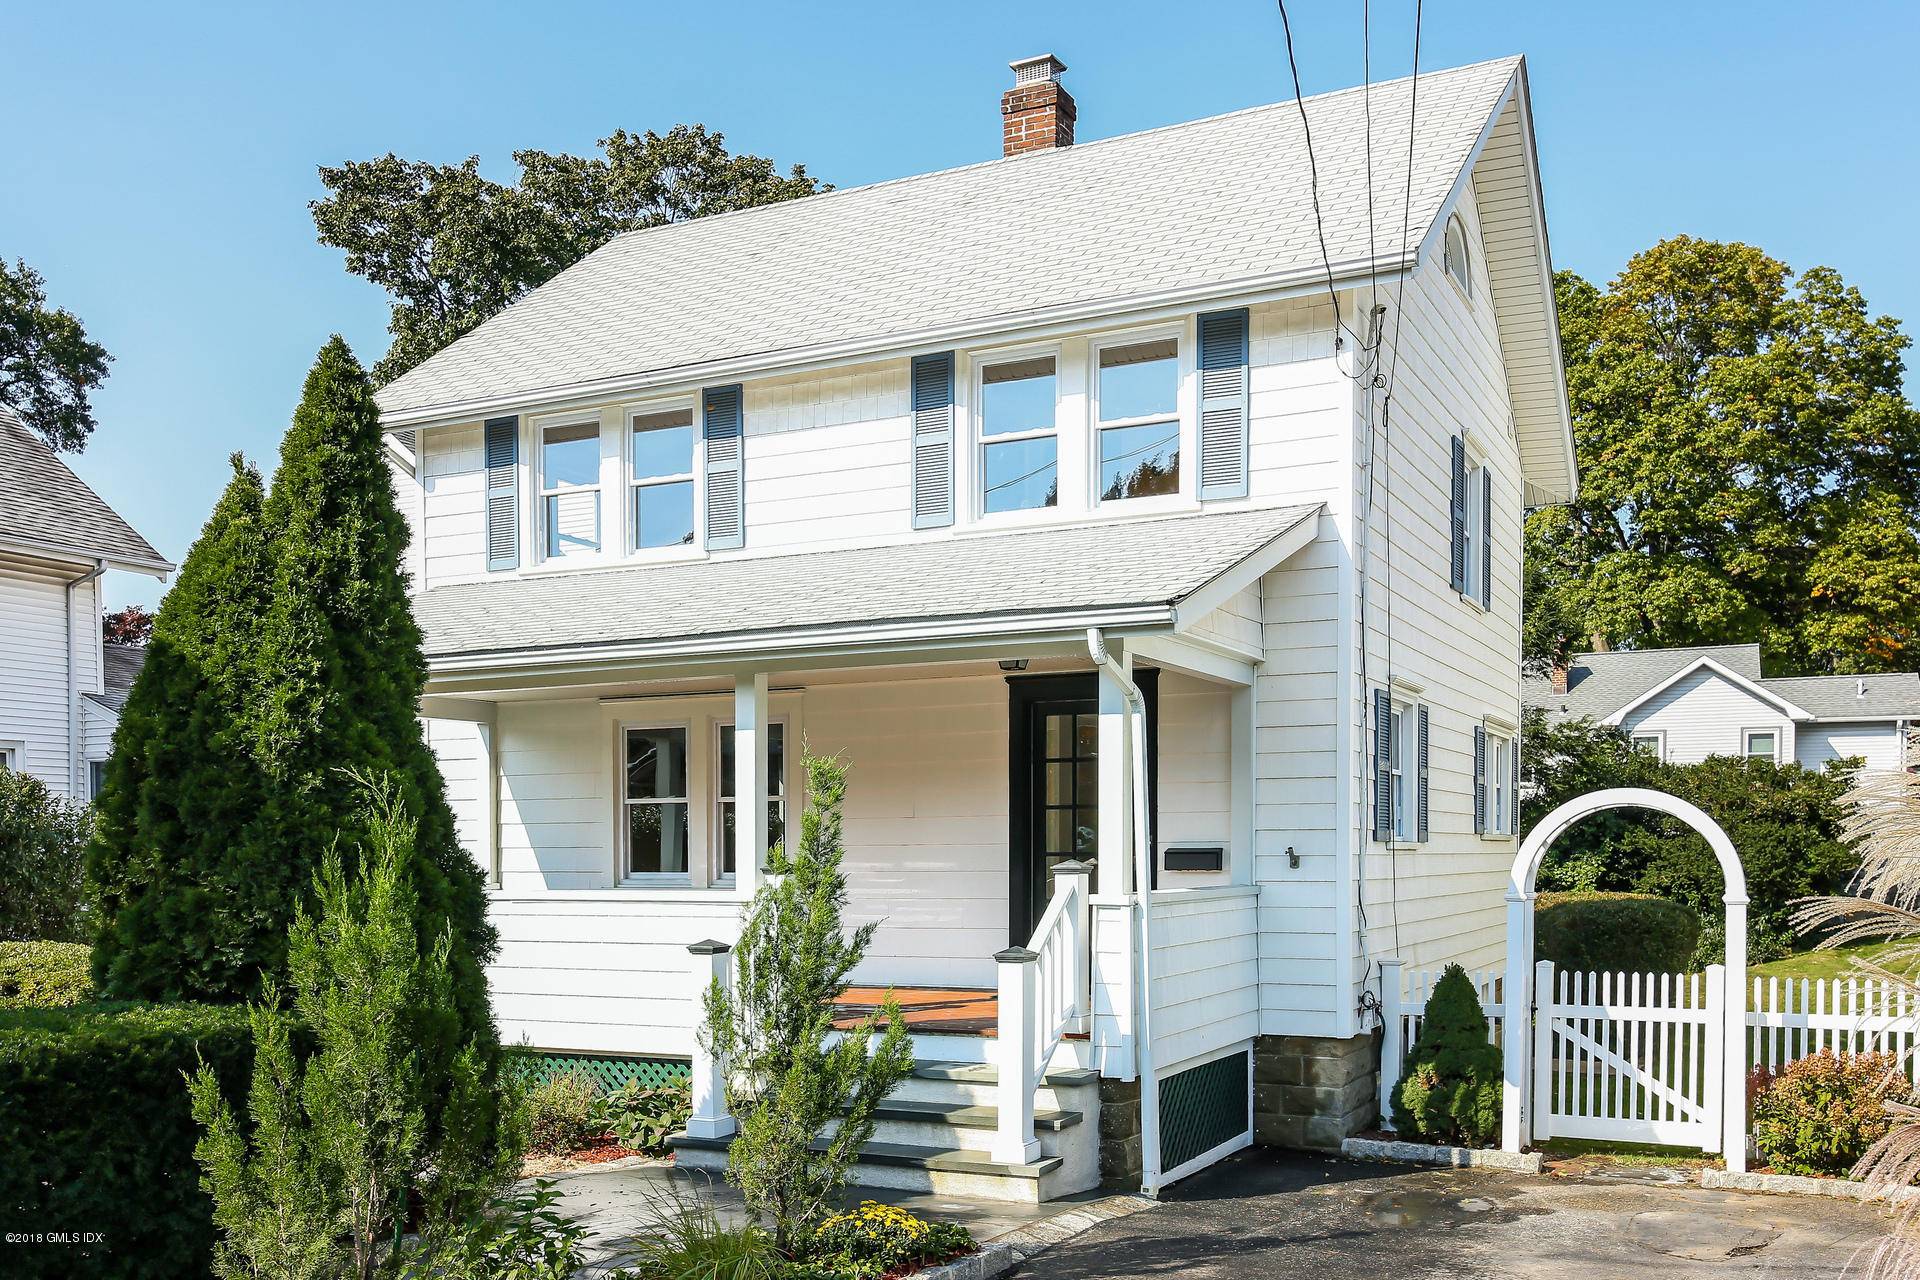 ABSOLUTELY CHARMING, SUN DRENCHED, TOTALLY AND TASTEFULLY RENOVATED 1920'S SHORE COLONIAL WITH PRIVATE OVERSIZED REAR YARD WITH SWEEPING LAWN.